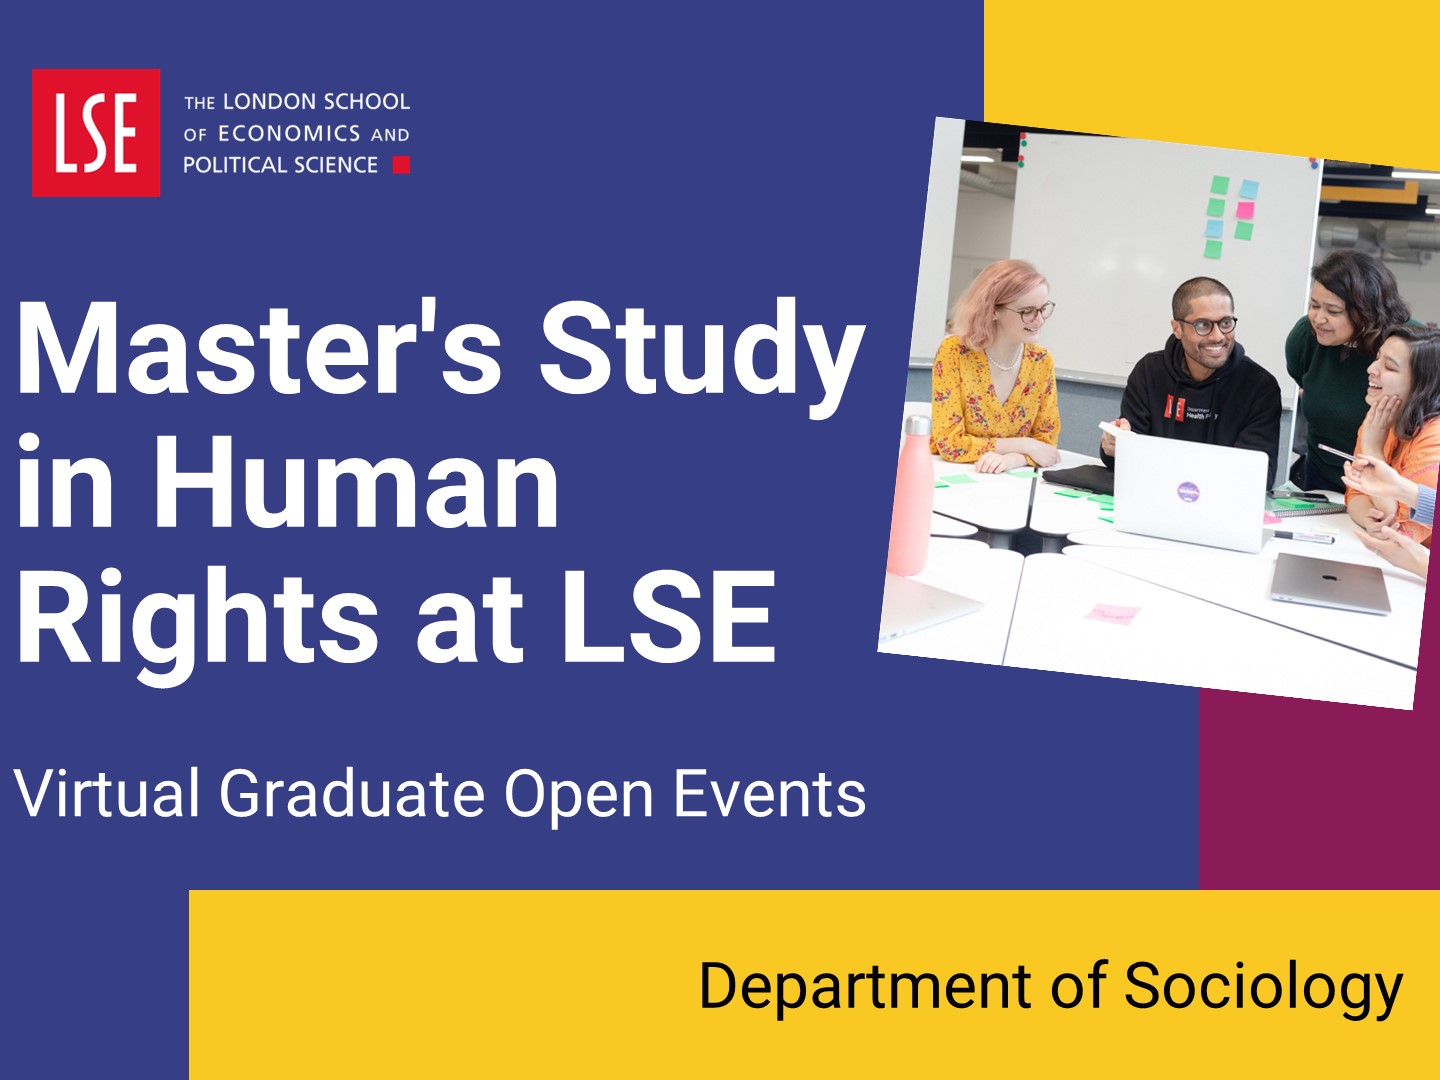 Introduction to master's study in Human Rights at LSE